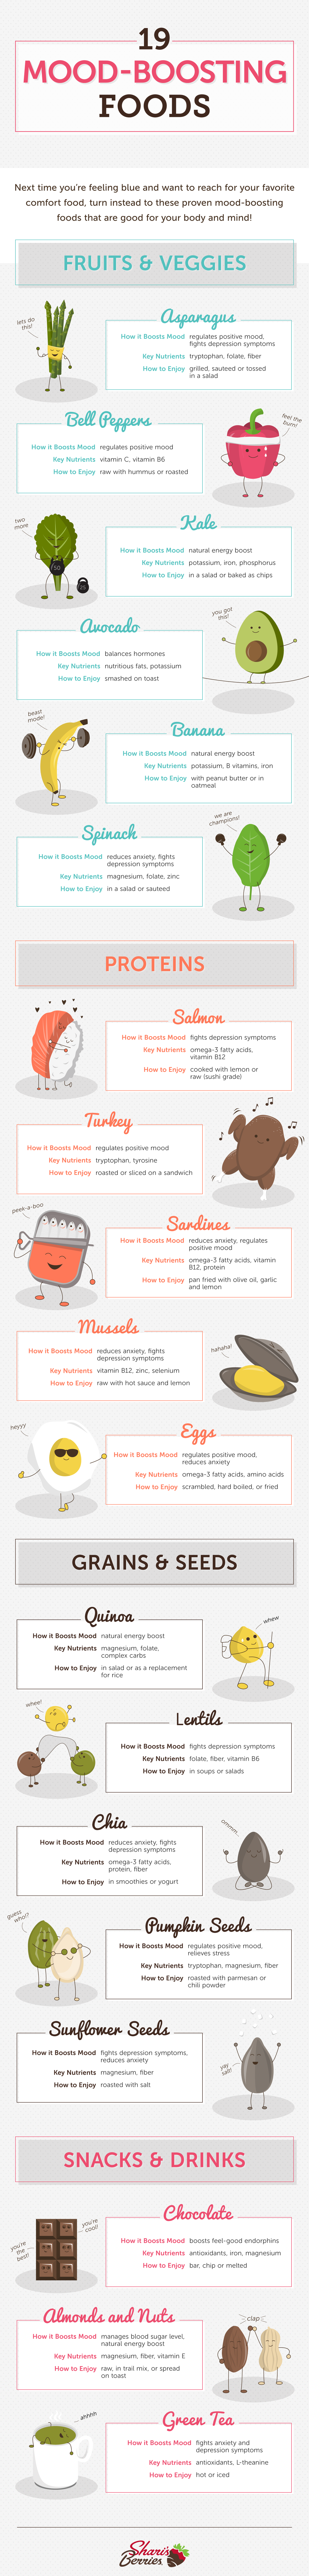 infographic of mood boosting foods